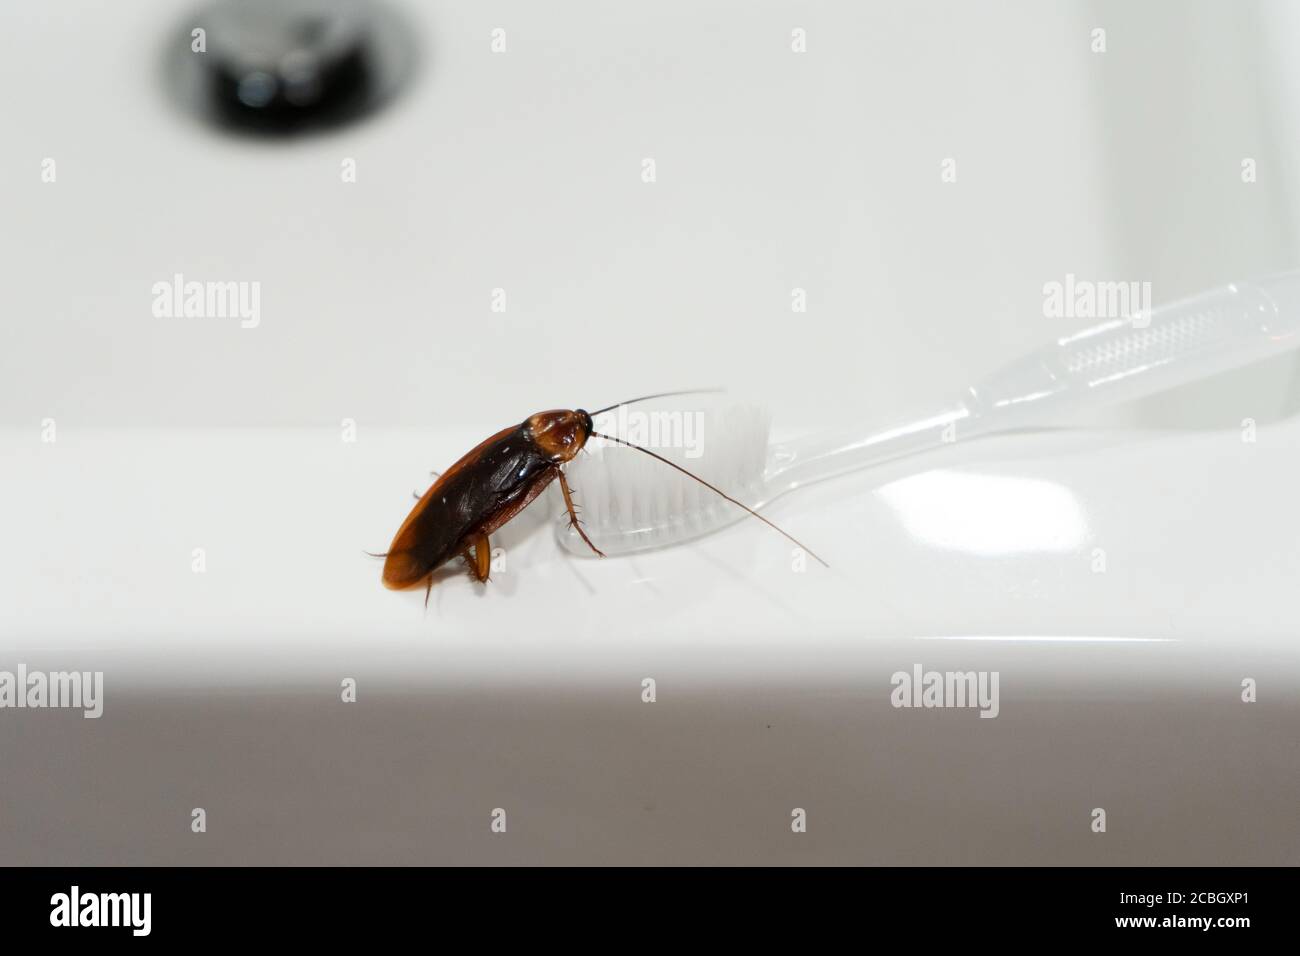 Cockroach In The Bathroom On The Sink The Problem With Insects 2CBGXP1 